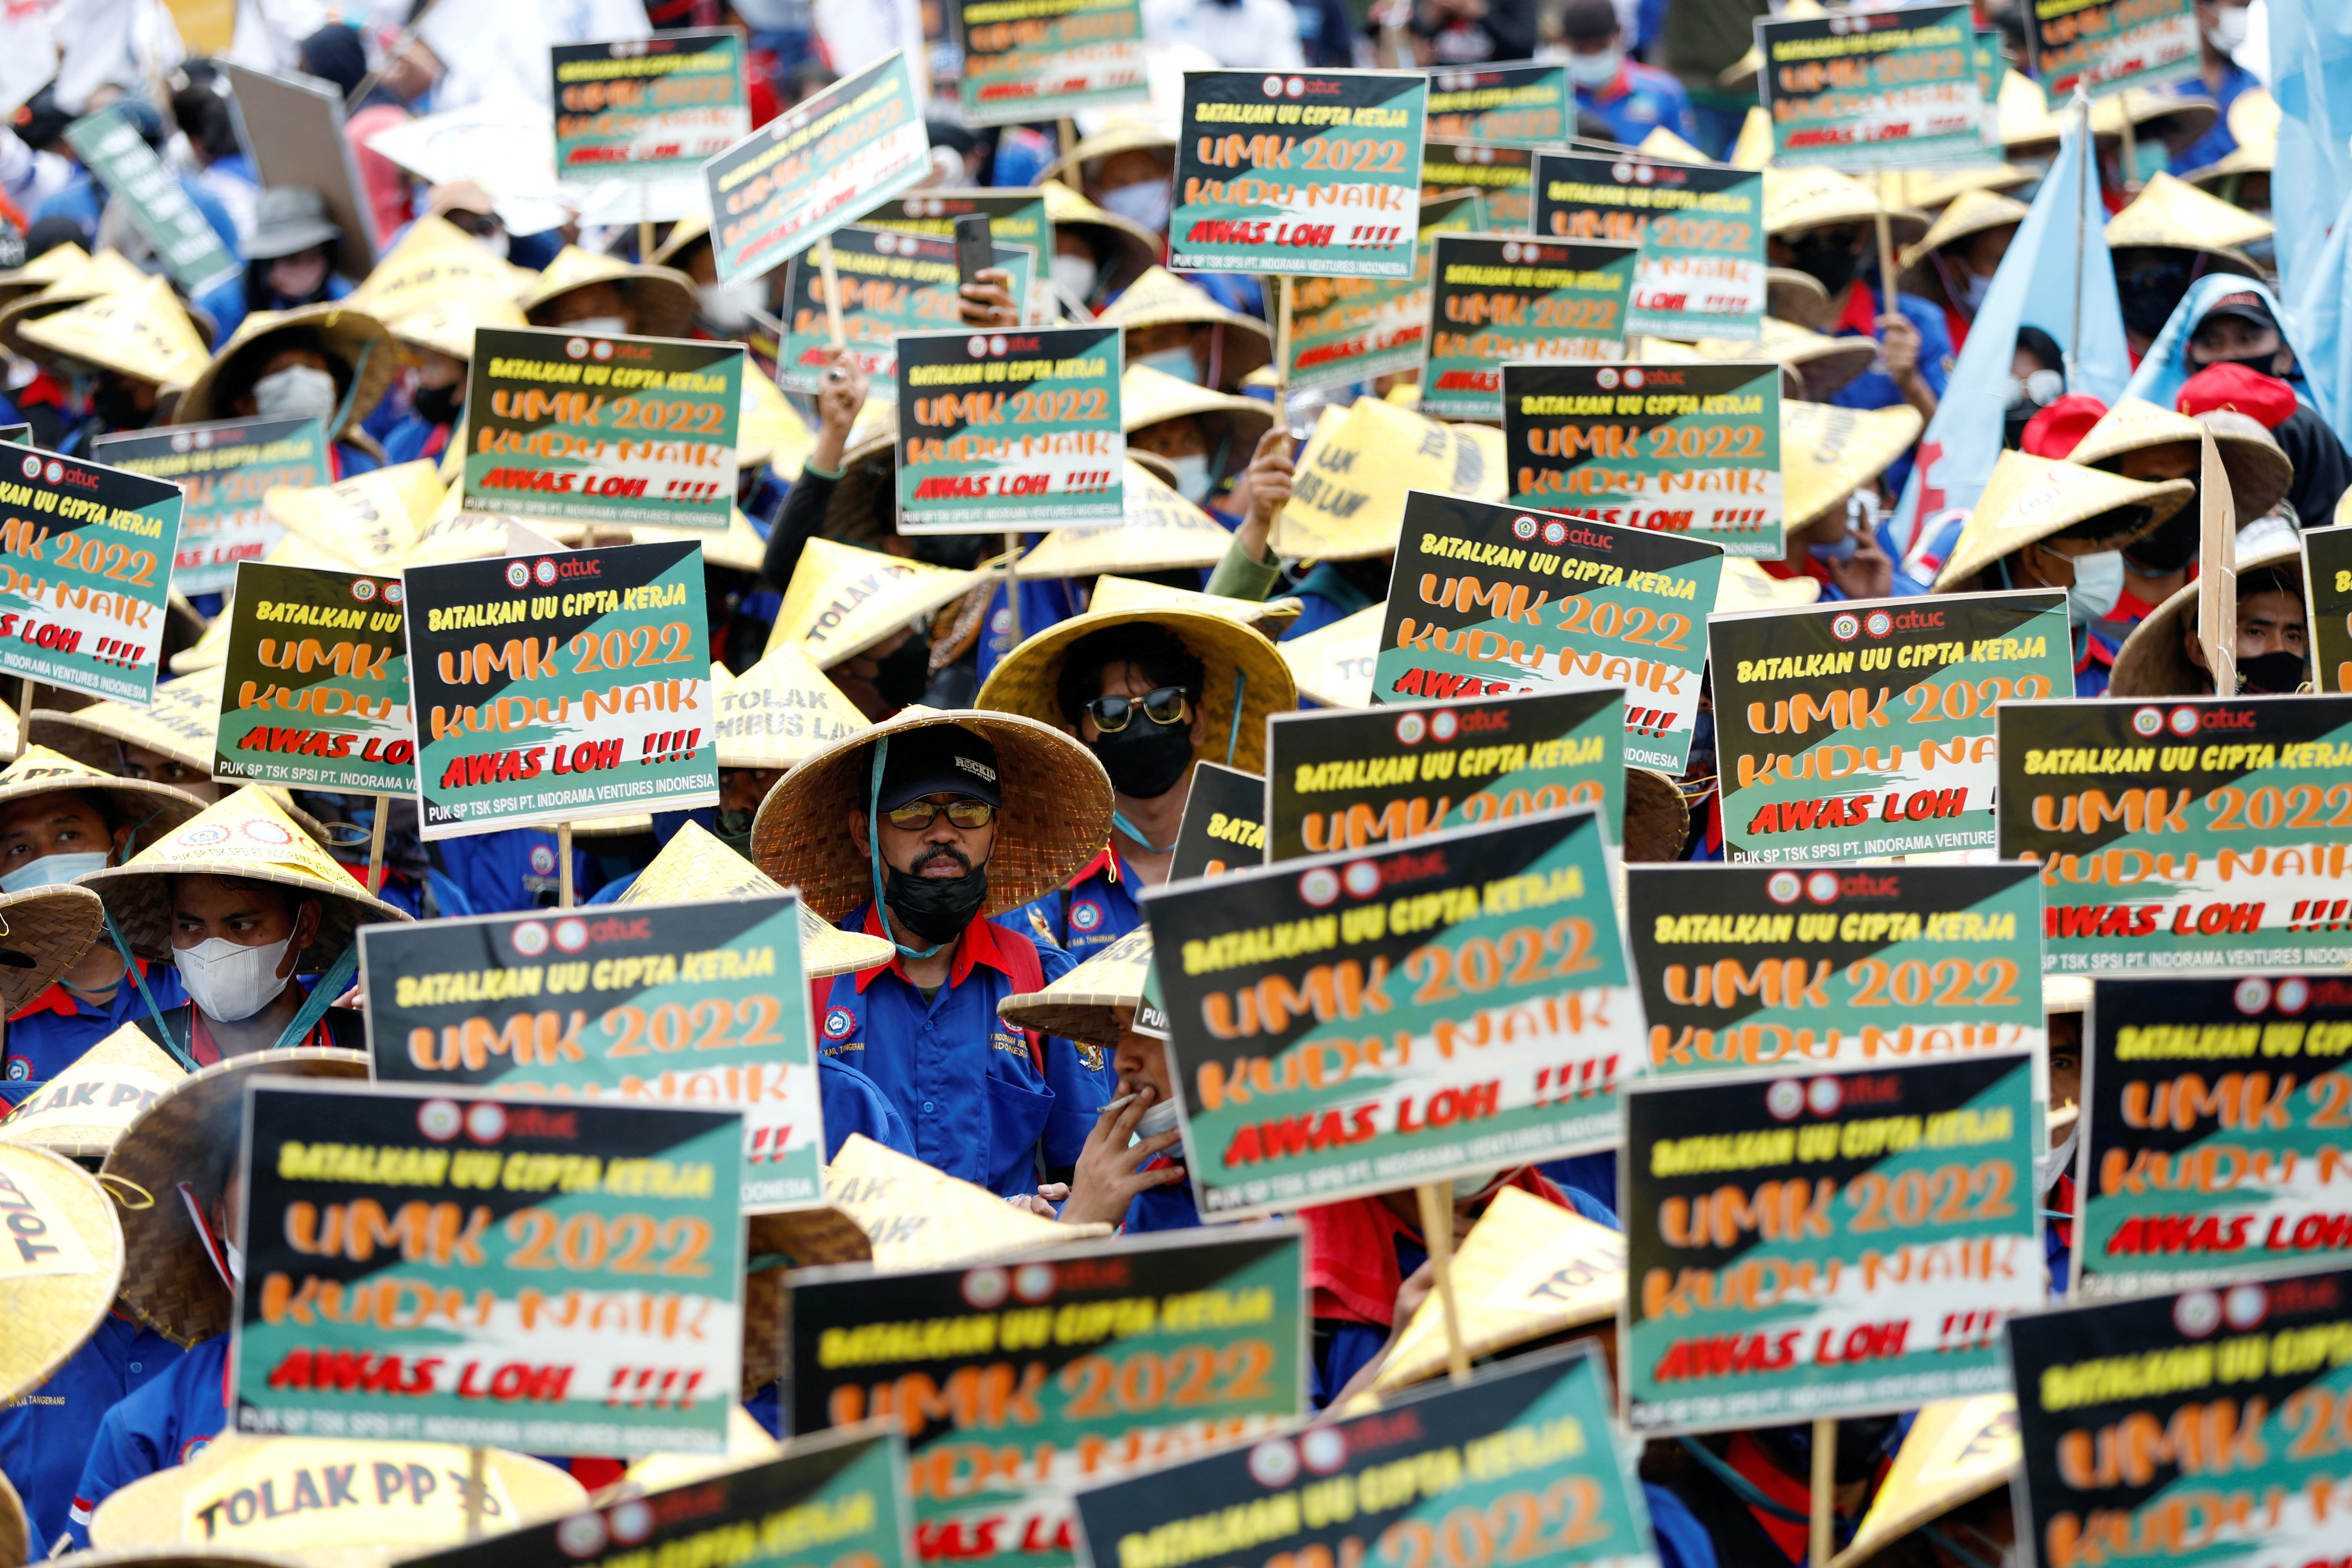 Members of Indonesian trade unions hold placards during a protest against the government's labor reforms, as Indonesia's Constitutional Court reads the verdict on a judicial review filed on the controversial 'omnibus' or job creation law in Jakarta, Indonesia, on November 25, 2021. (Reuters)